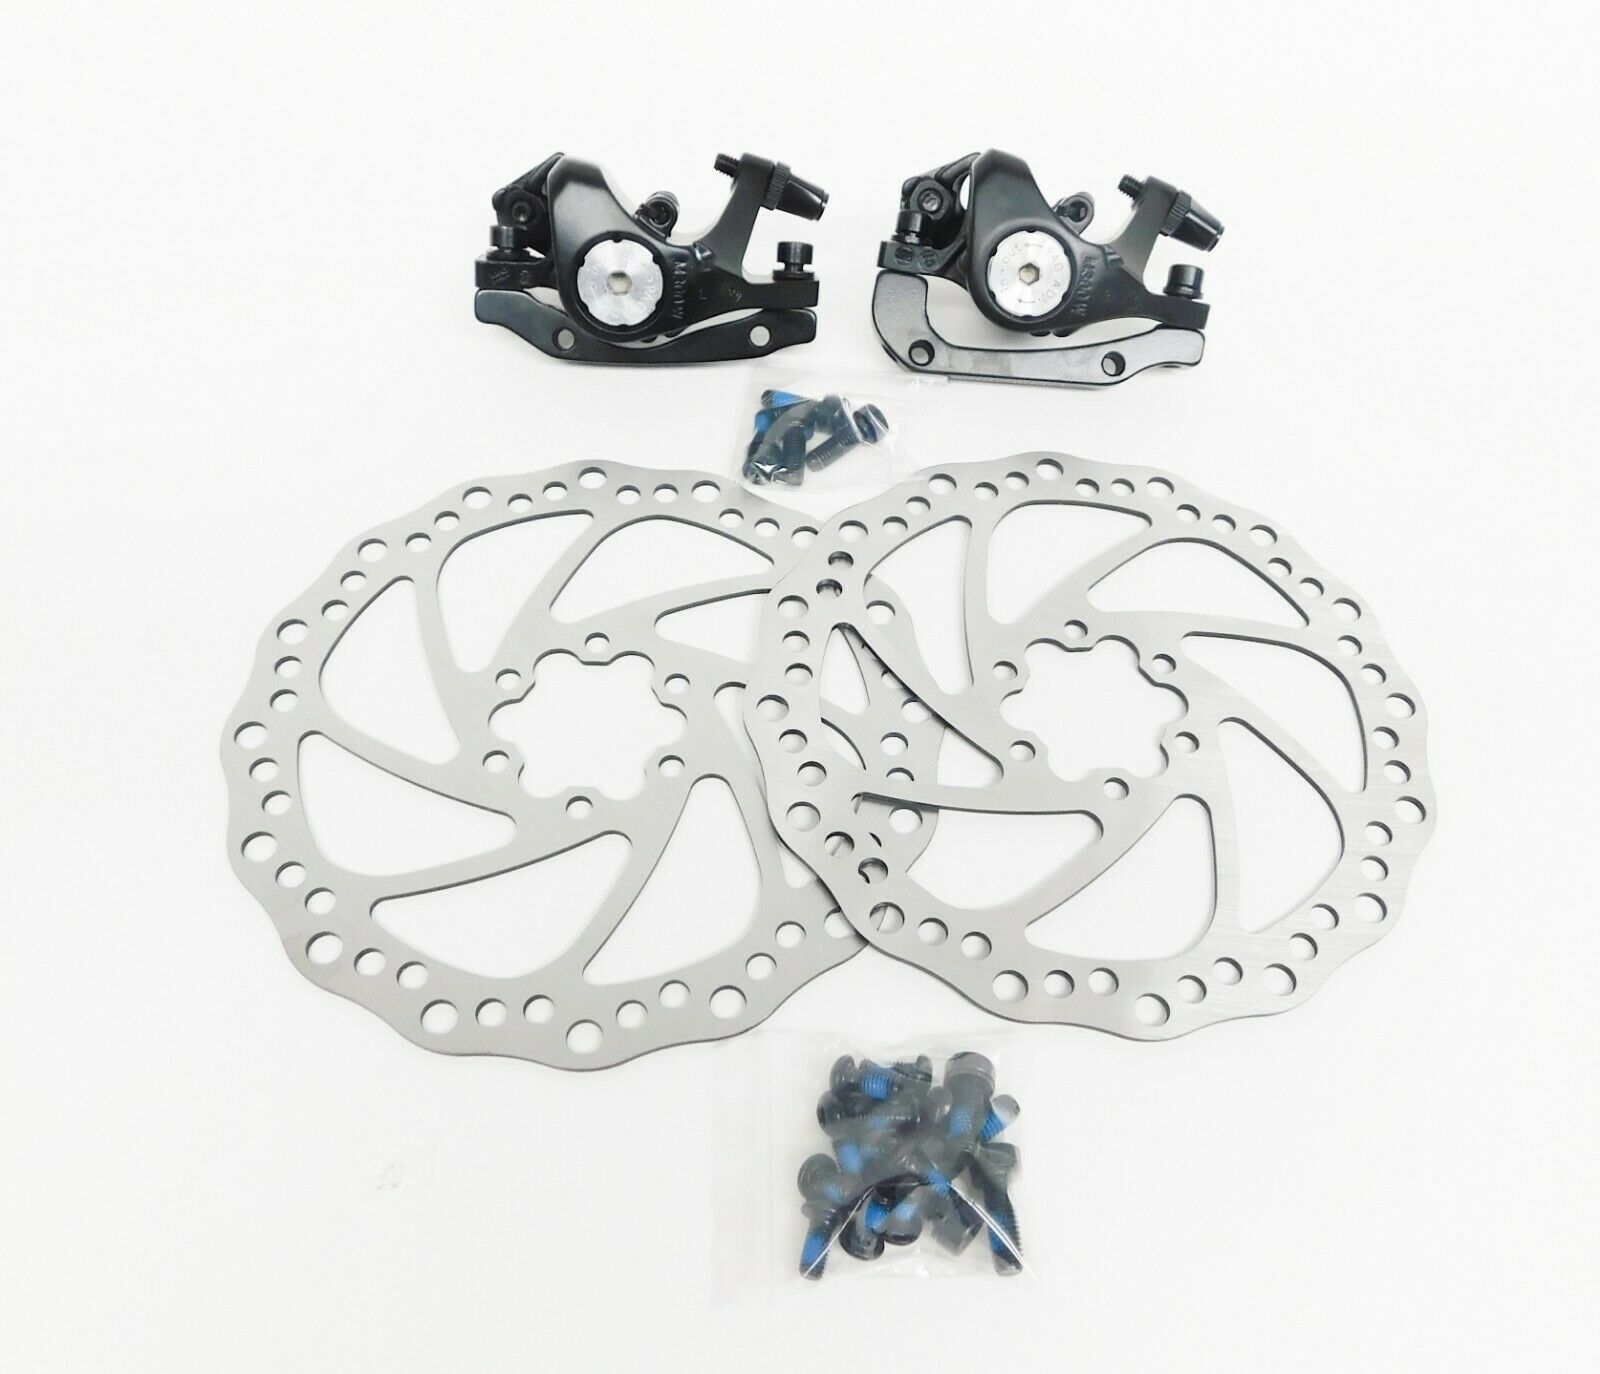 Tektro M300 Aries Mechanical Disc Brakes Front & Rear W Calipers, Rotors & Bolts